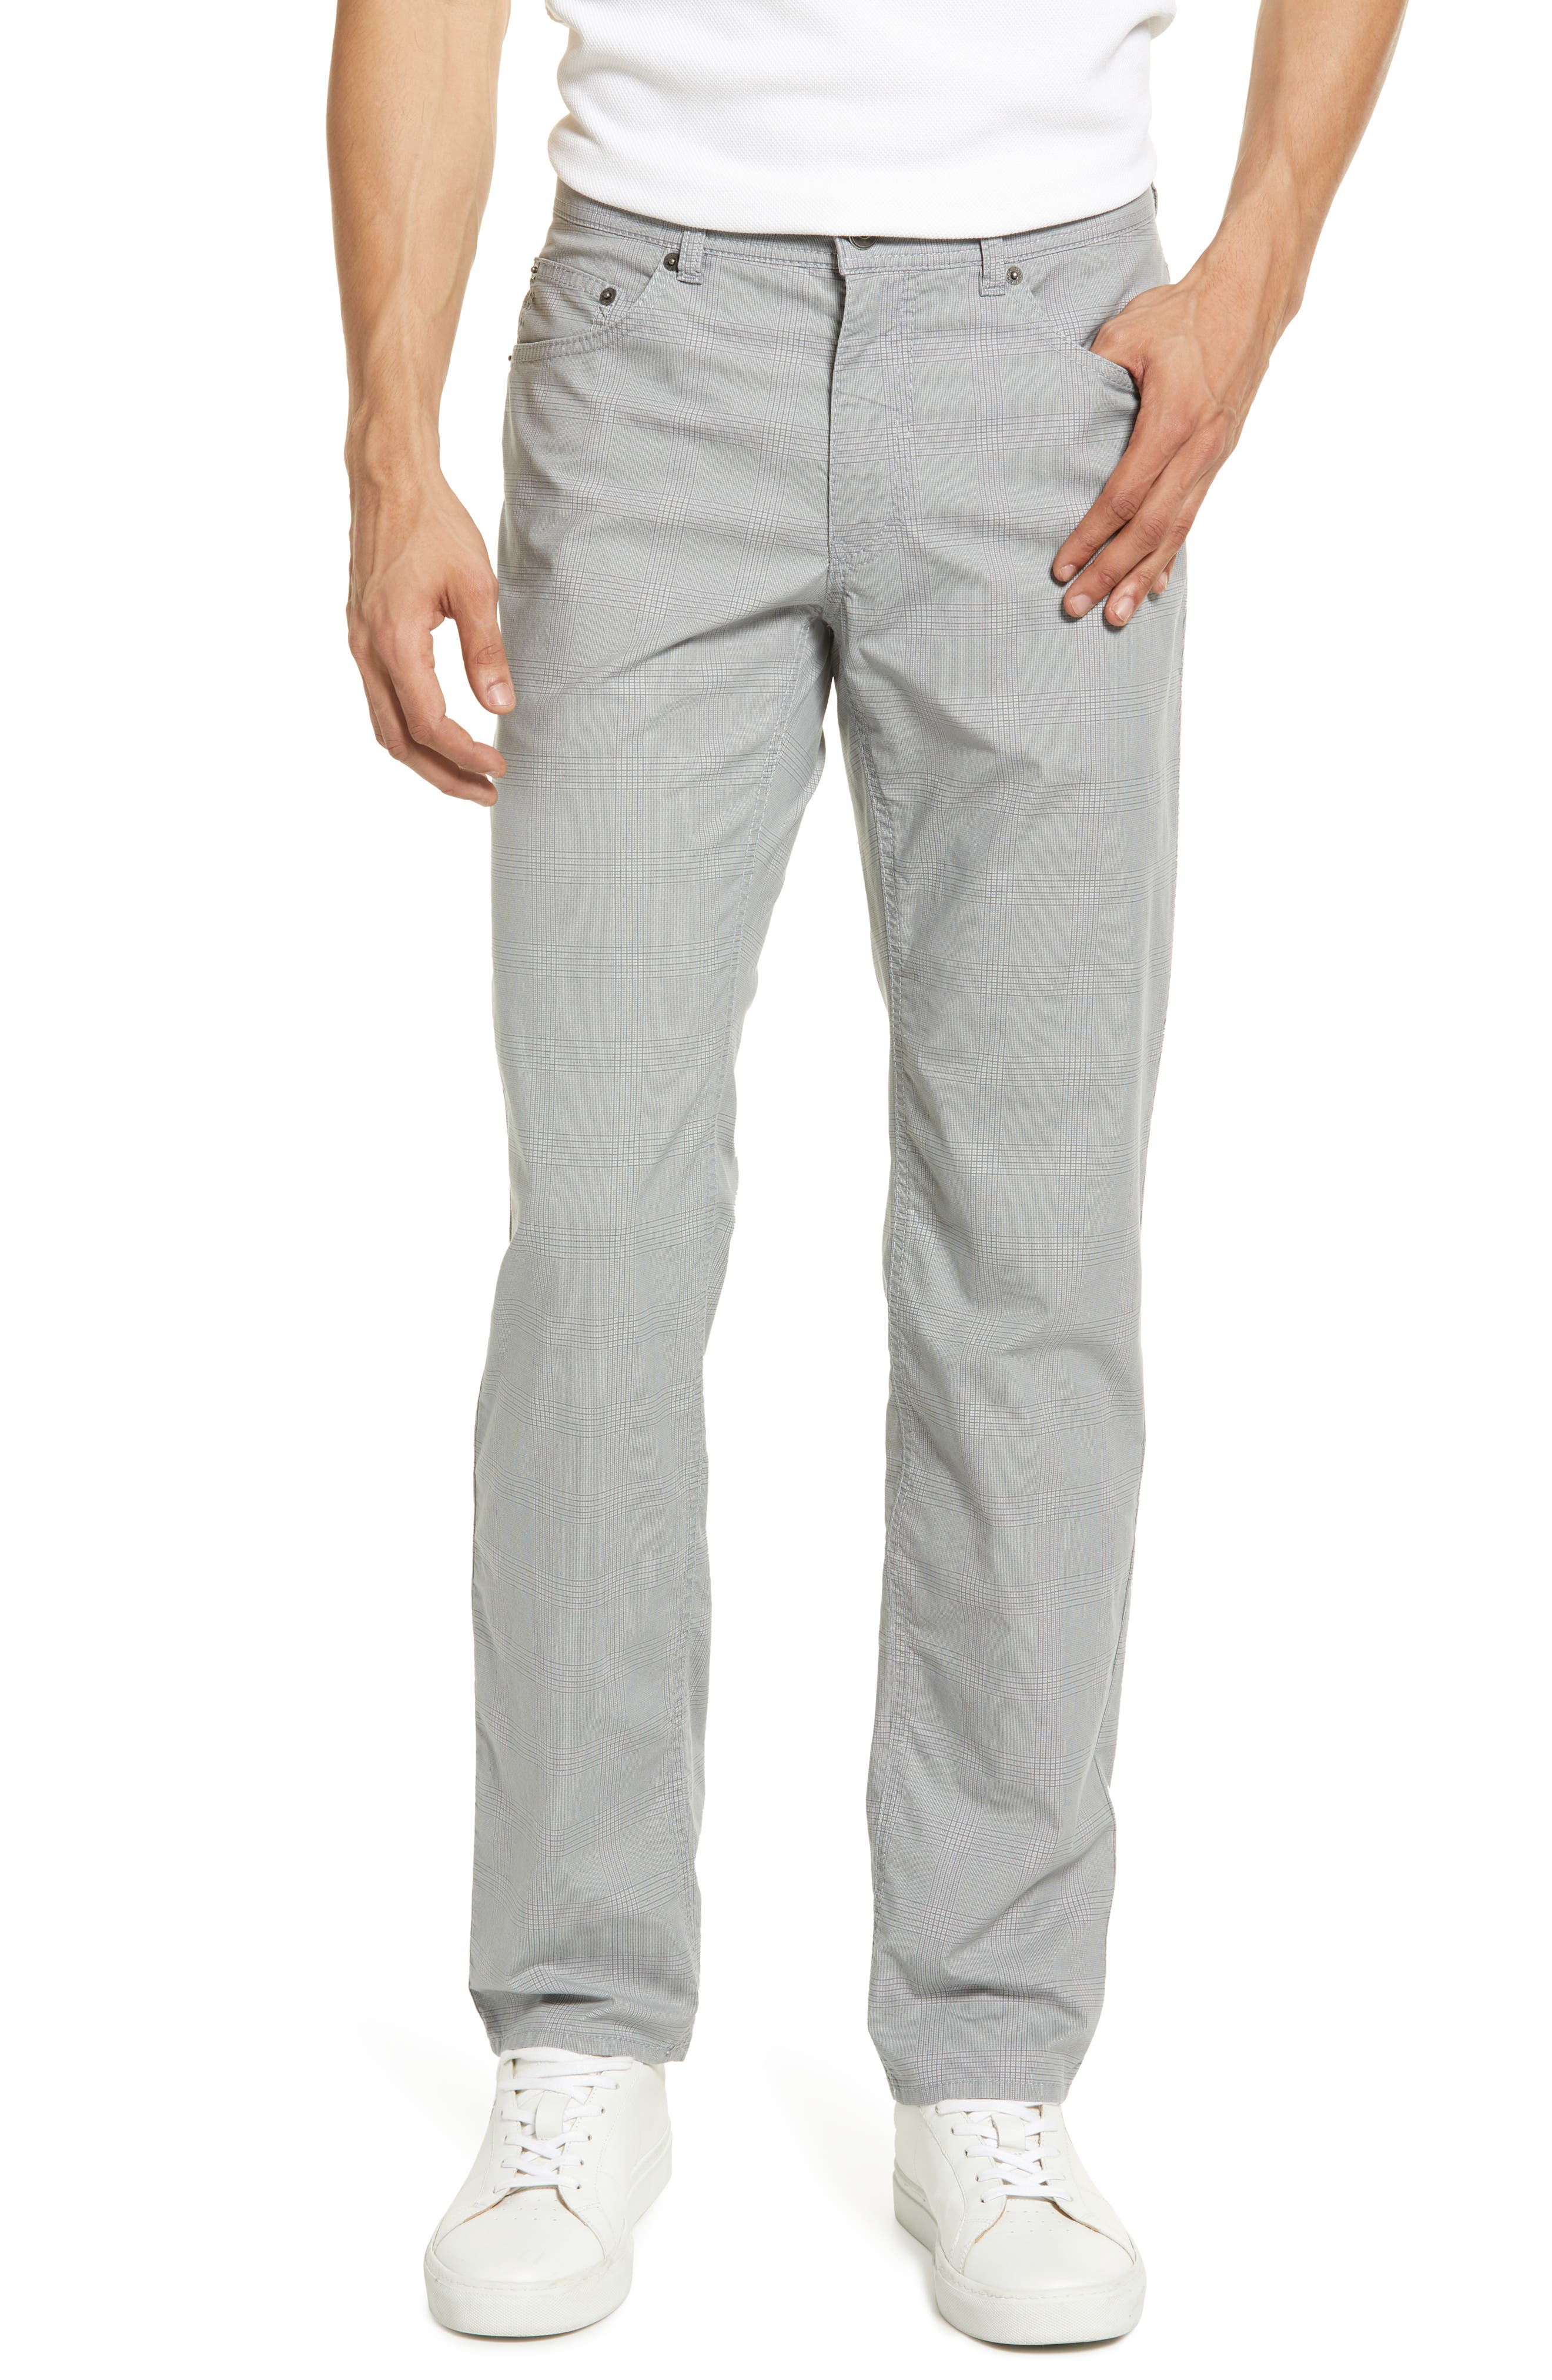 Fashion Trousers Five-Pocket Trousers Brax Five-Pocket Trousers light grey simple style 